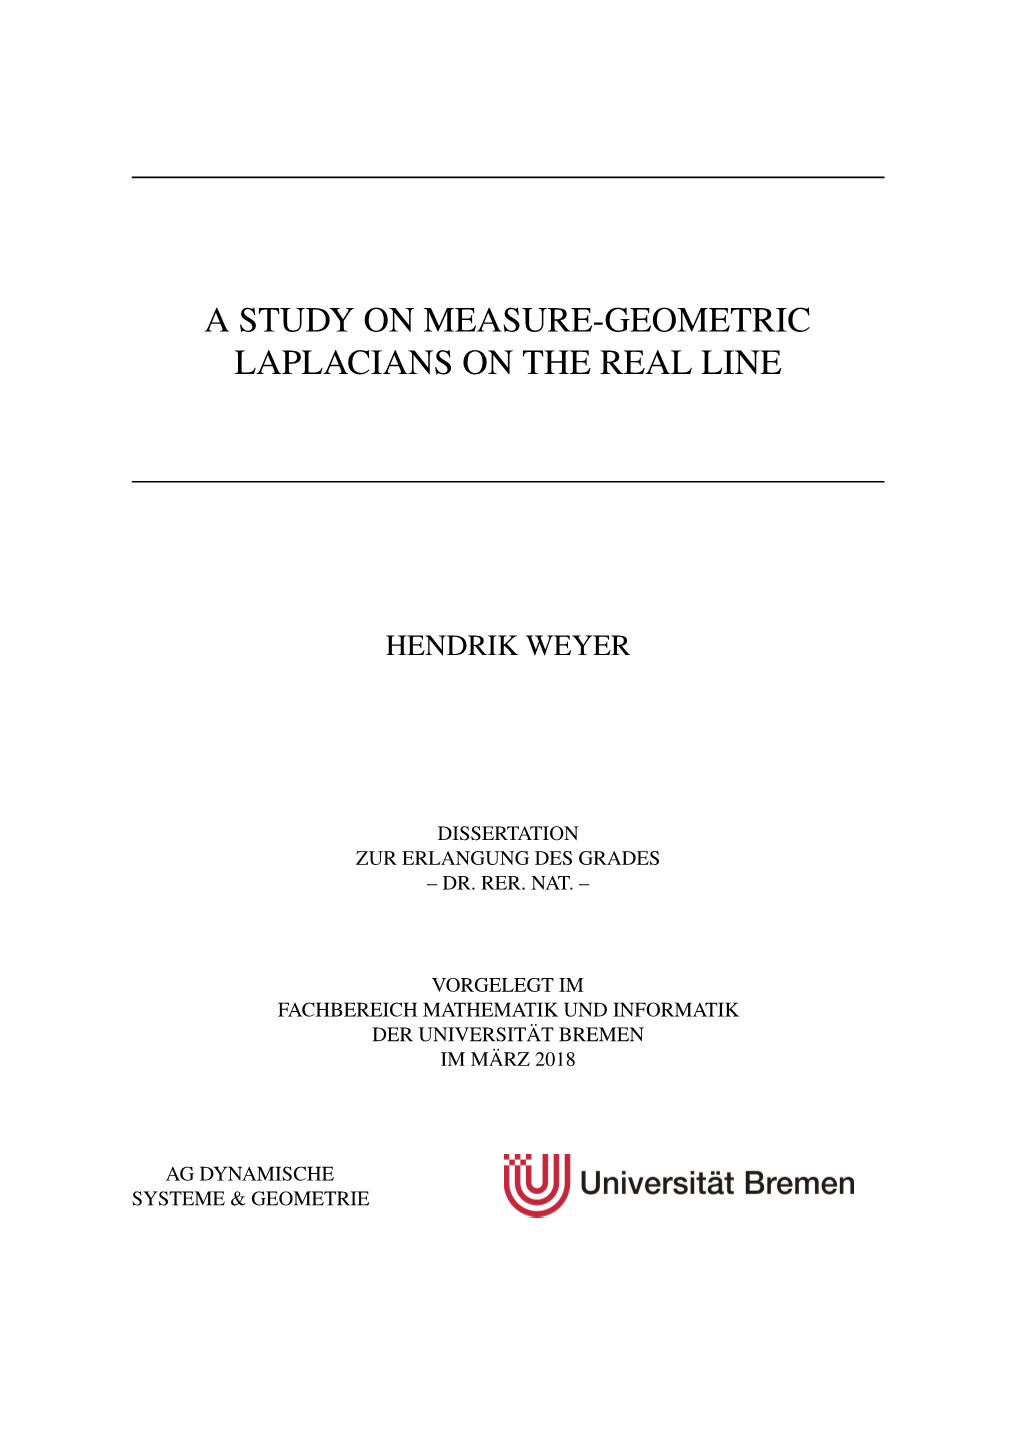 A Study on Measure-Geometric Laplacians on the Real Line